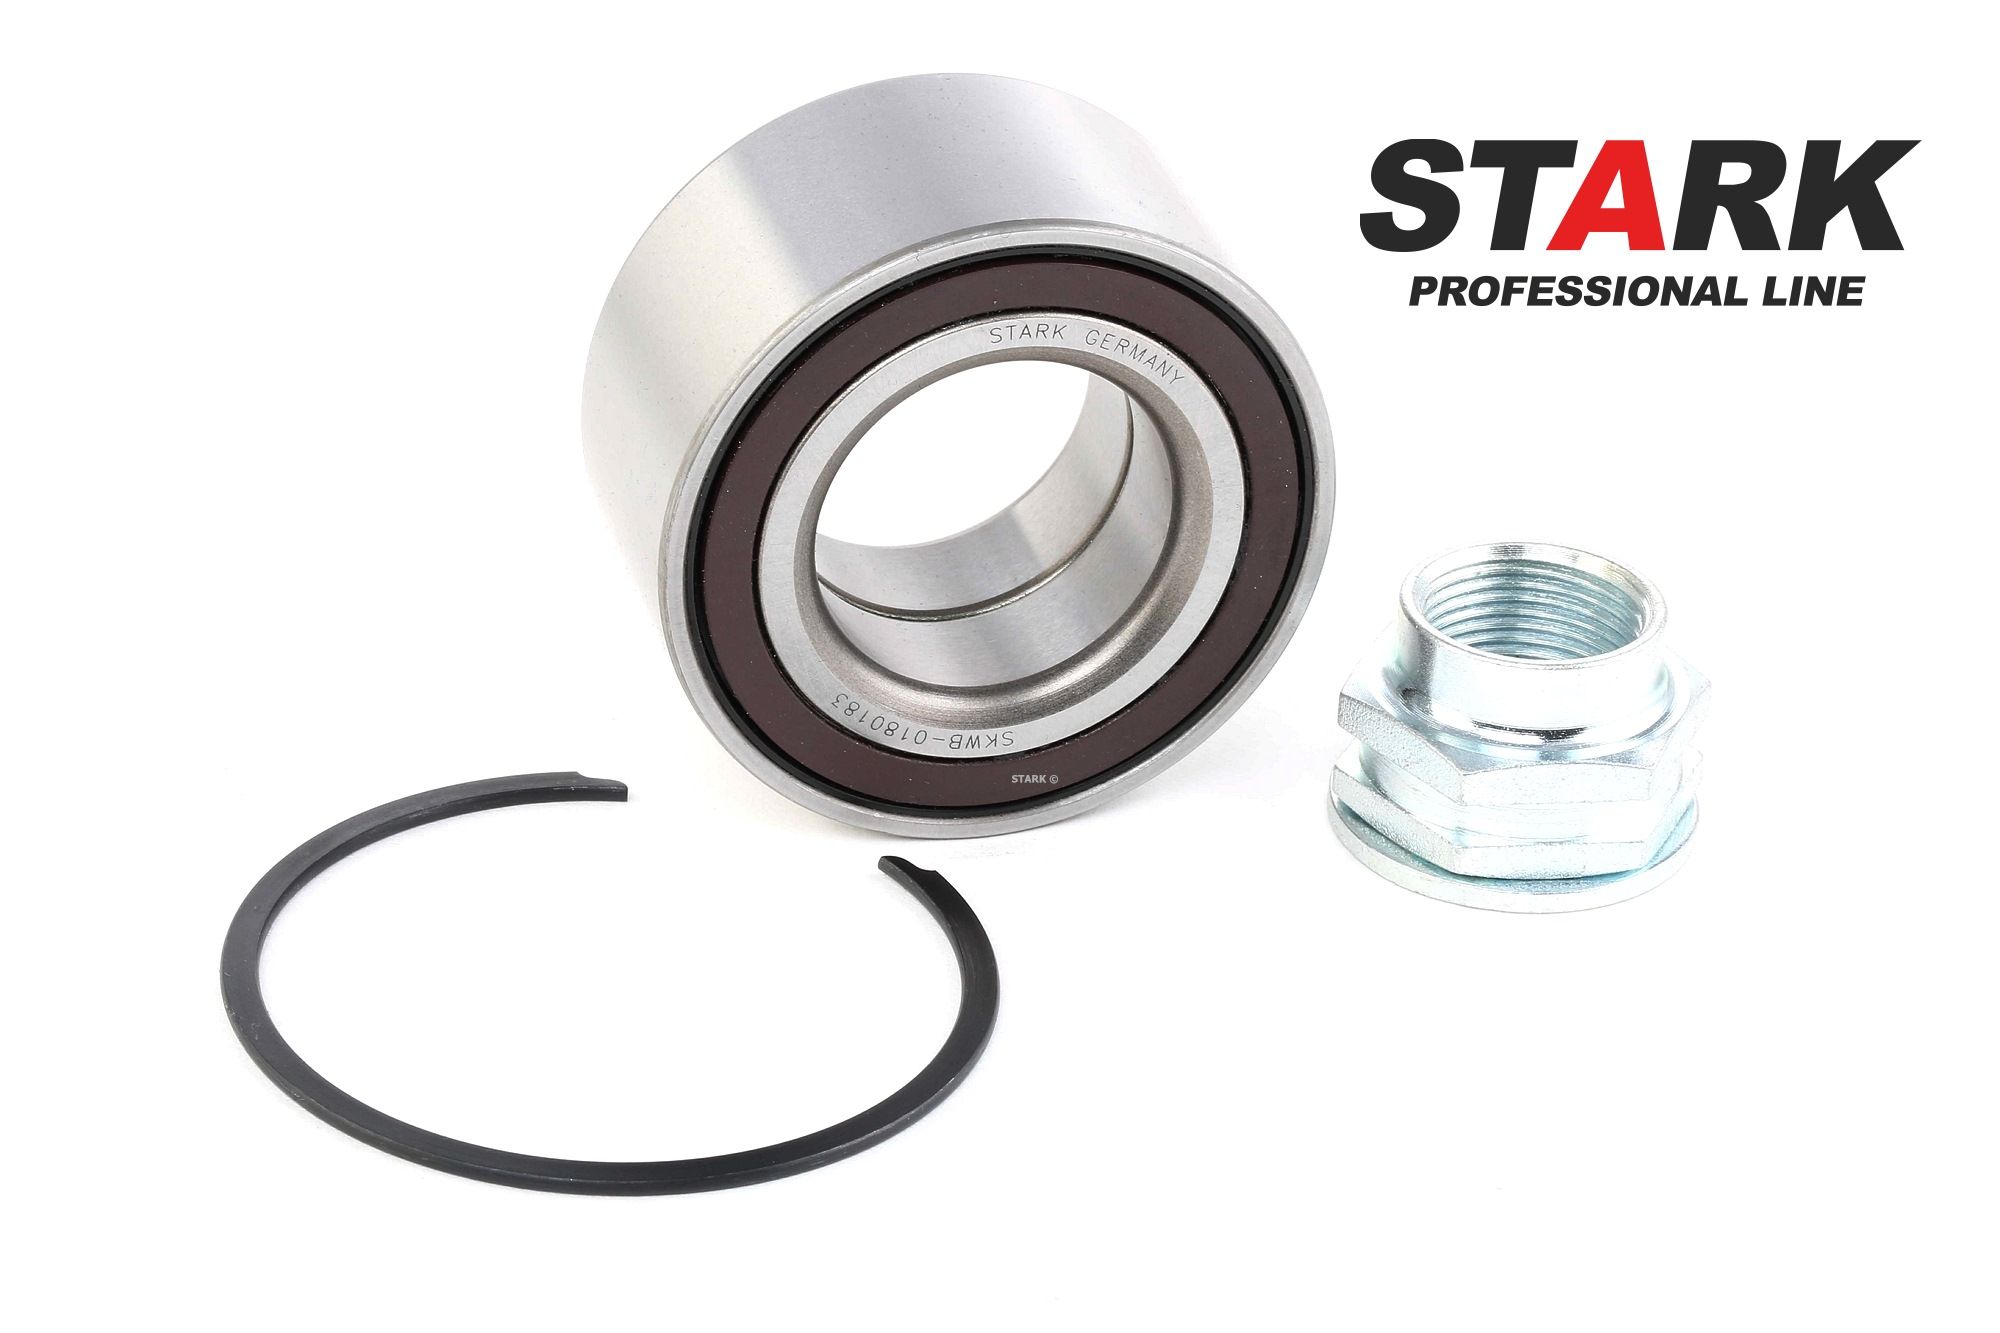 STARK SKWB-0180183 Wheel bearing kit Front axle both sides, Rear Axle, with integrated ABS sensor, 66 mm